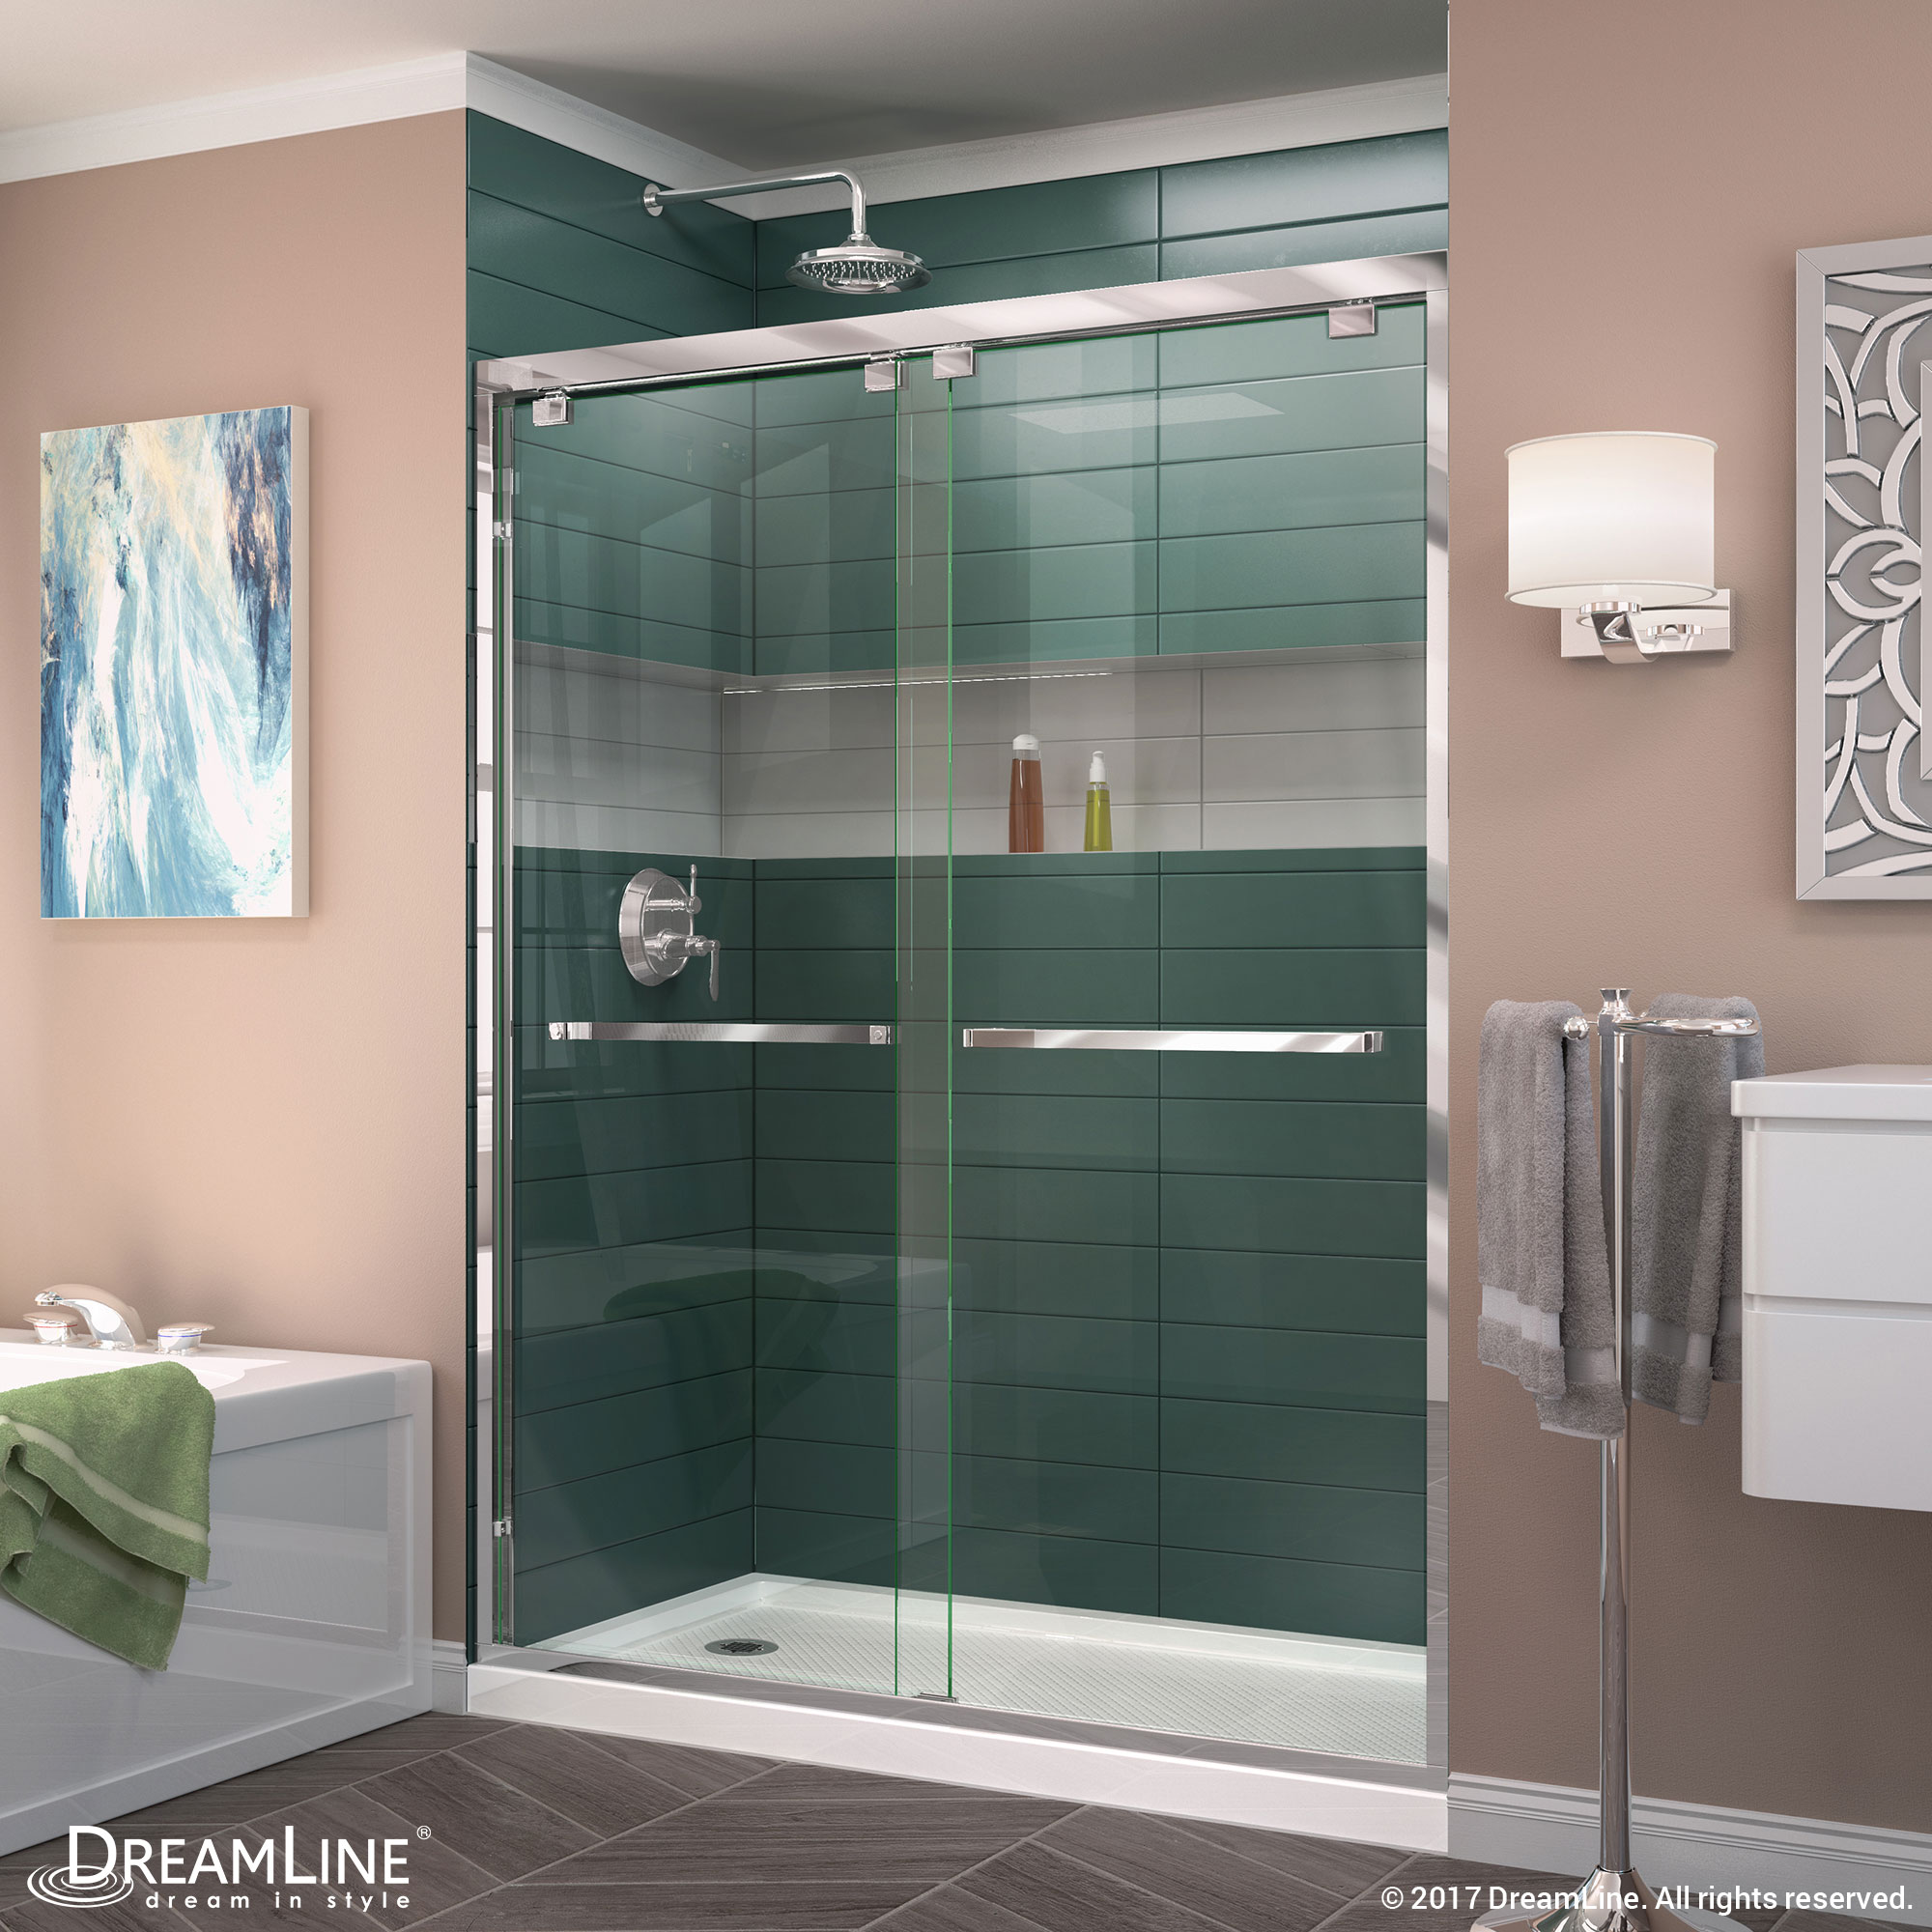 DreamLine Encore 30 in. D x 60 in. W x 78 3/4 in. H Bypass Shower Door in Chrome and Right Drain Biscuit Base Kit